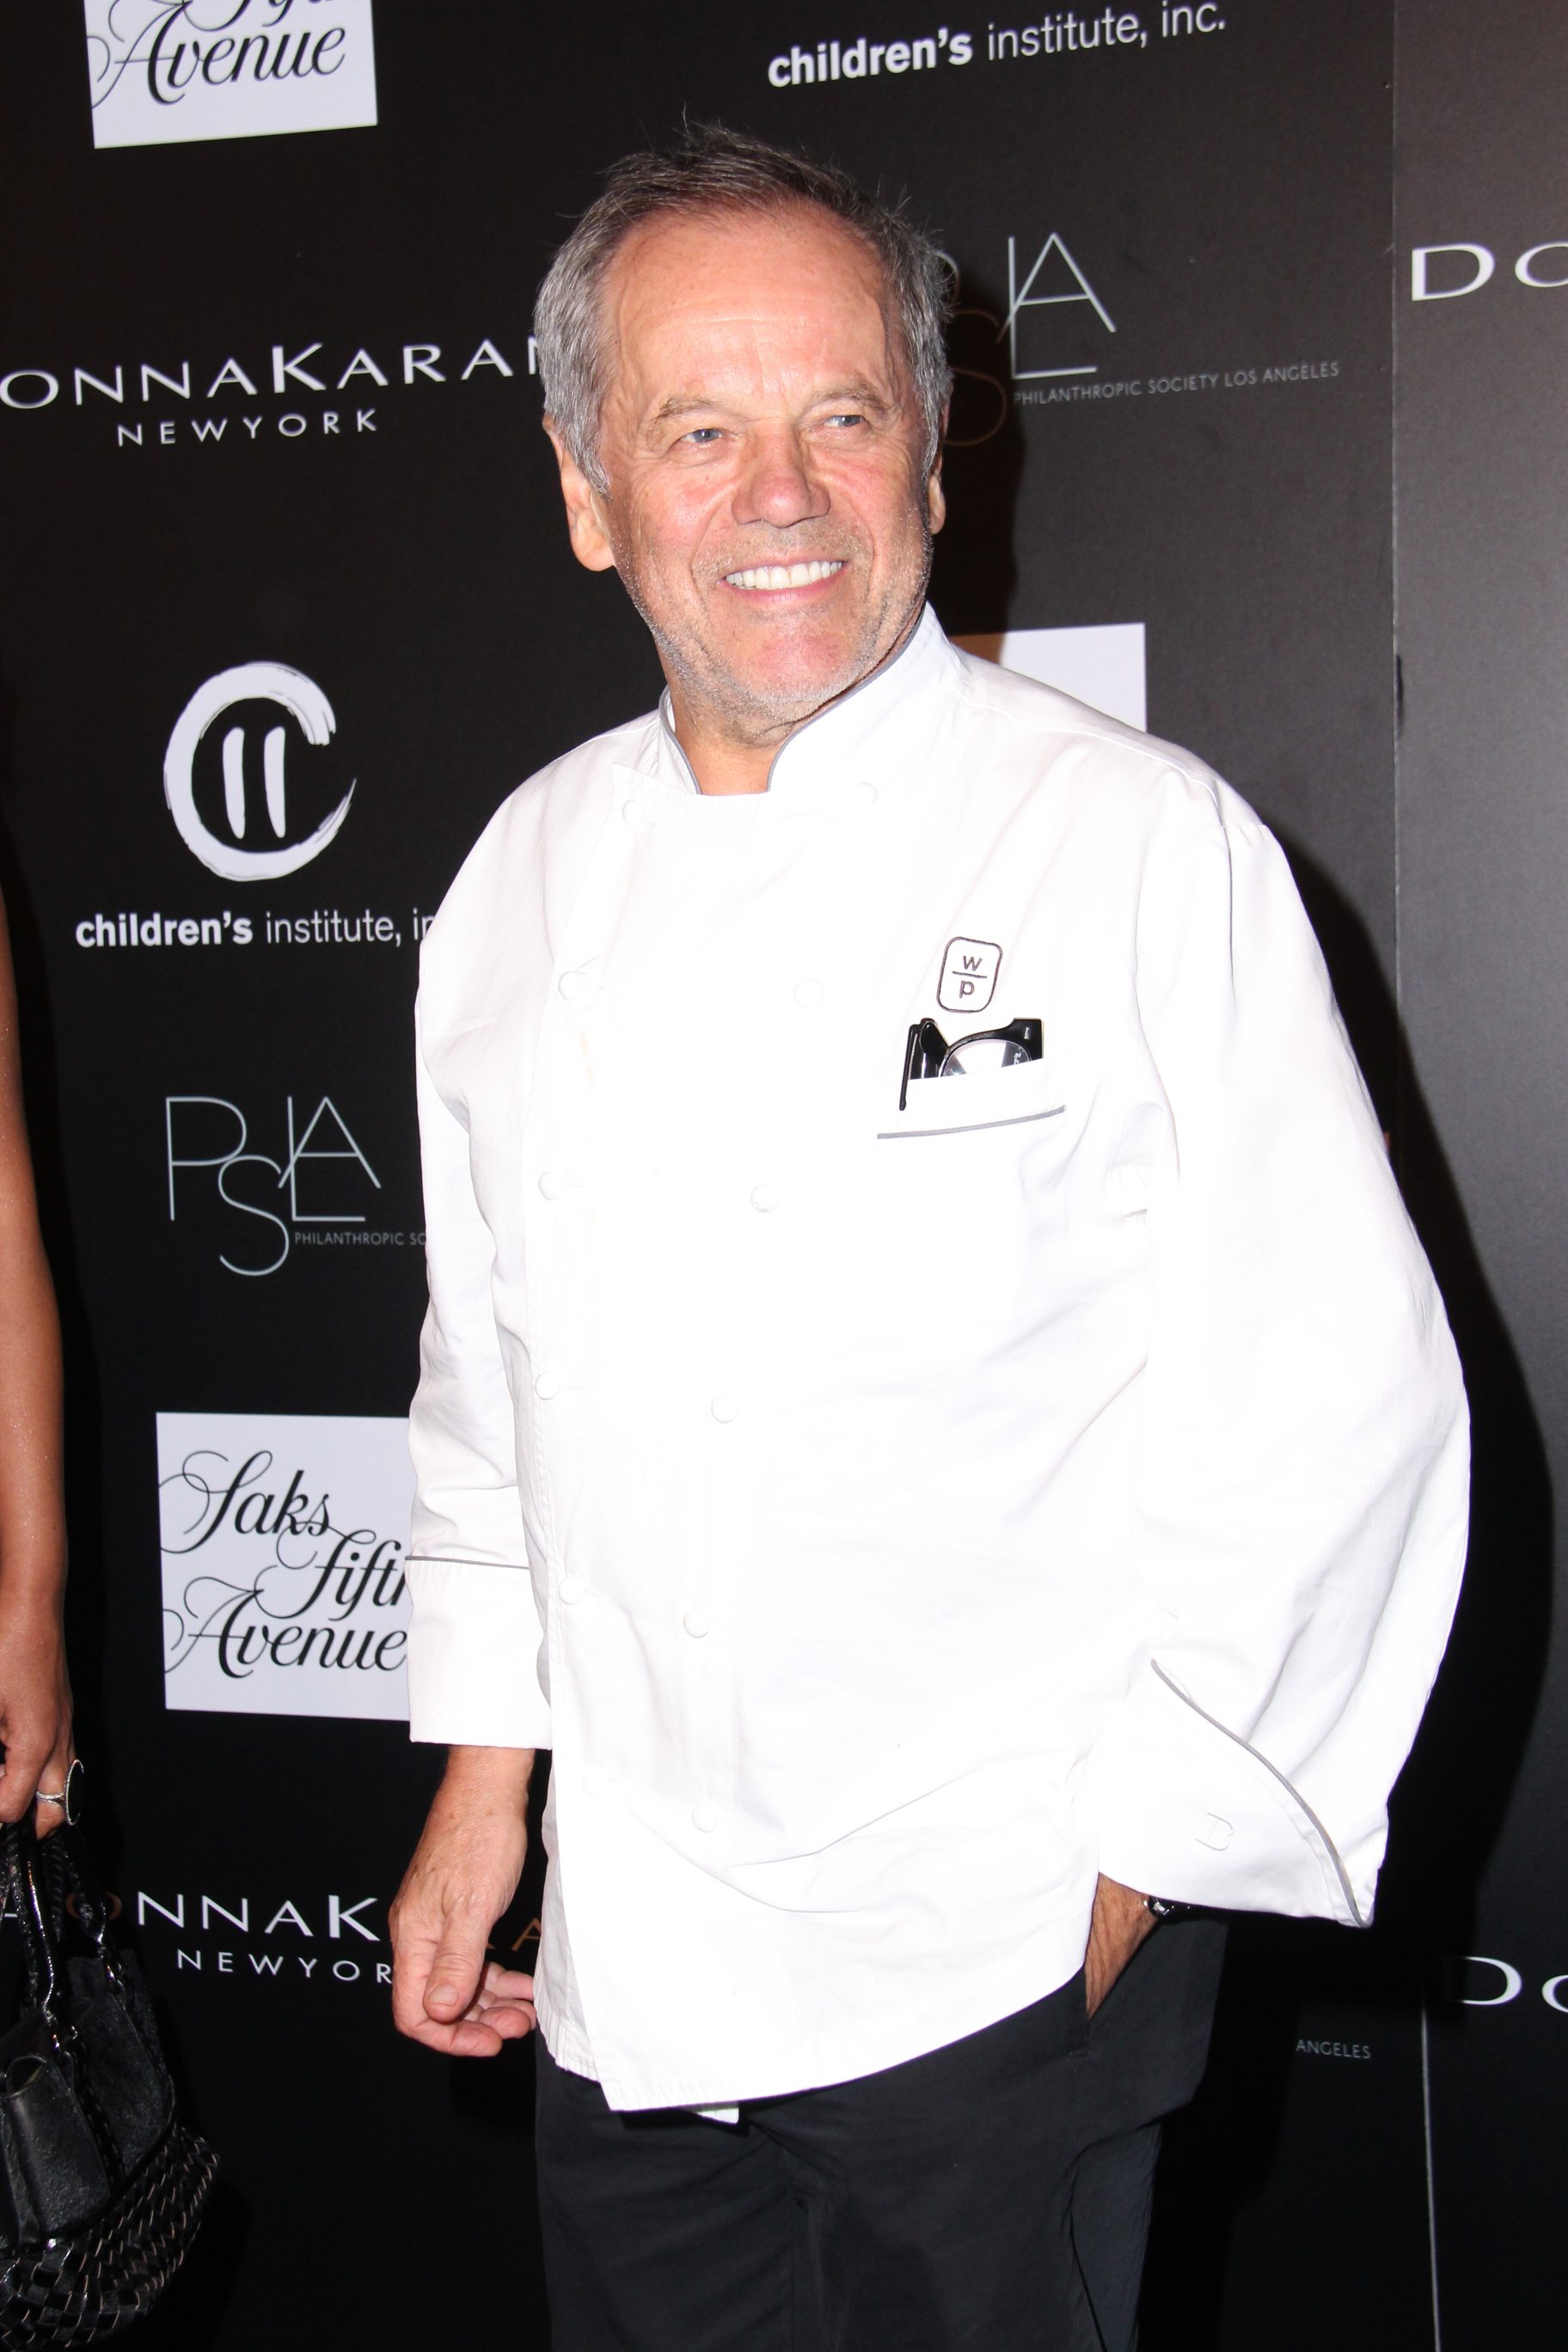 Wolfgang Puck - Austrian-American Chef of Top Richest Celebrity Chefs